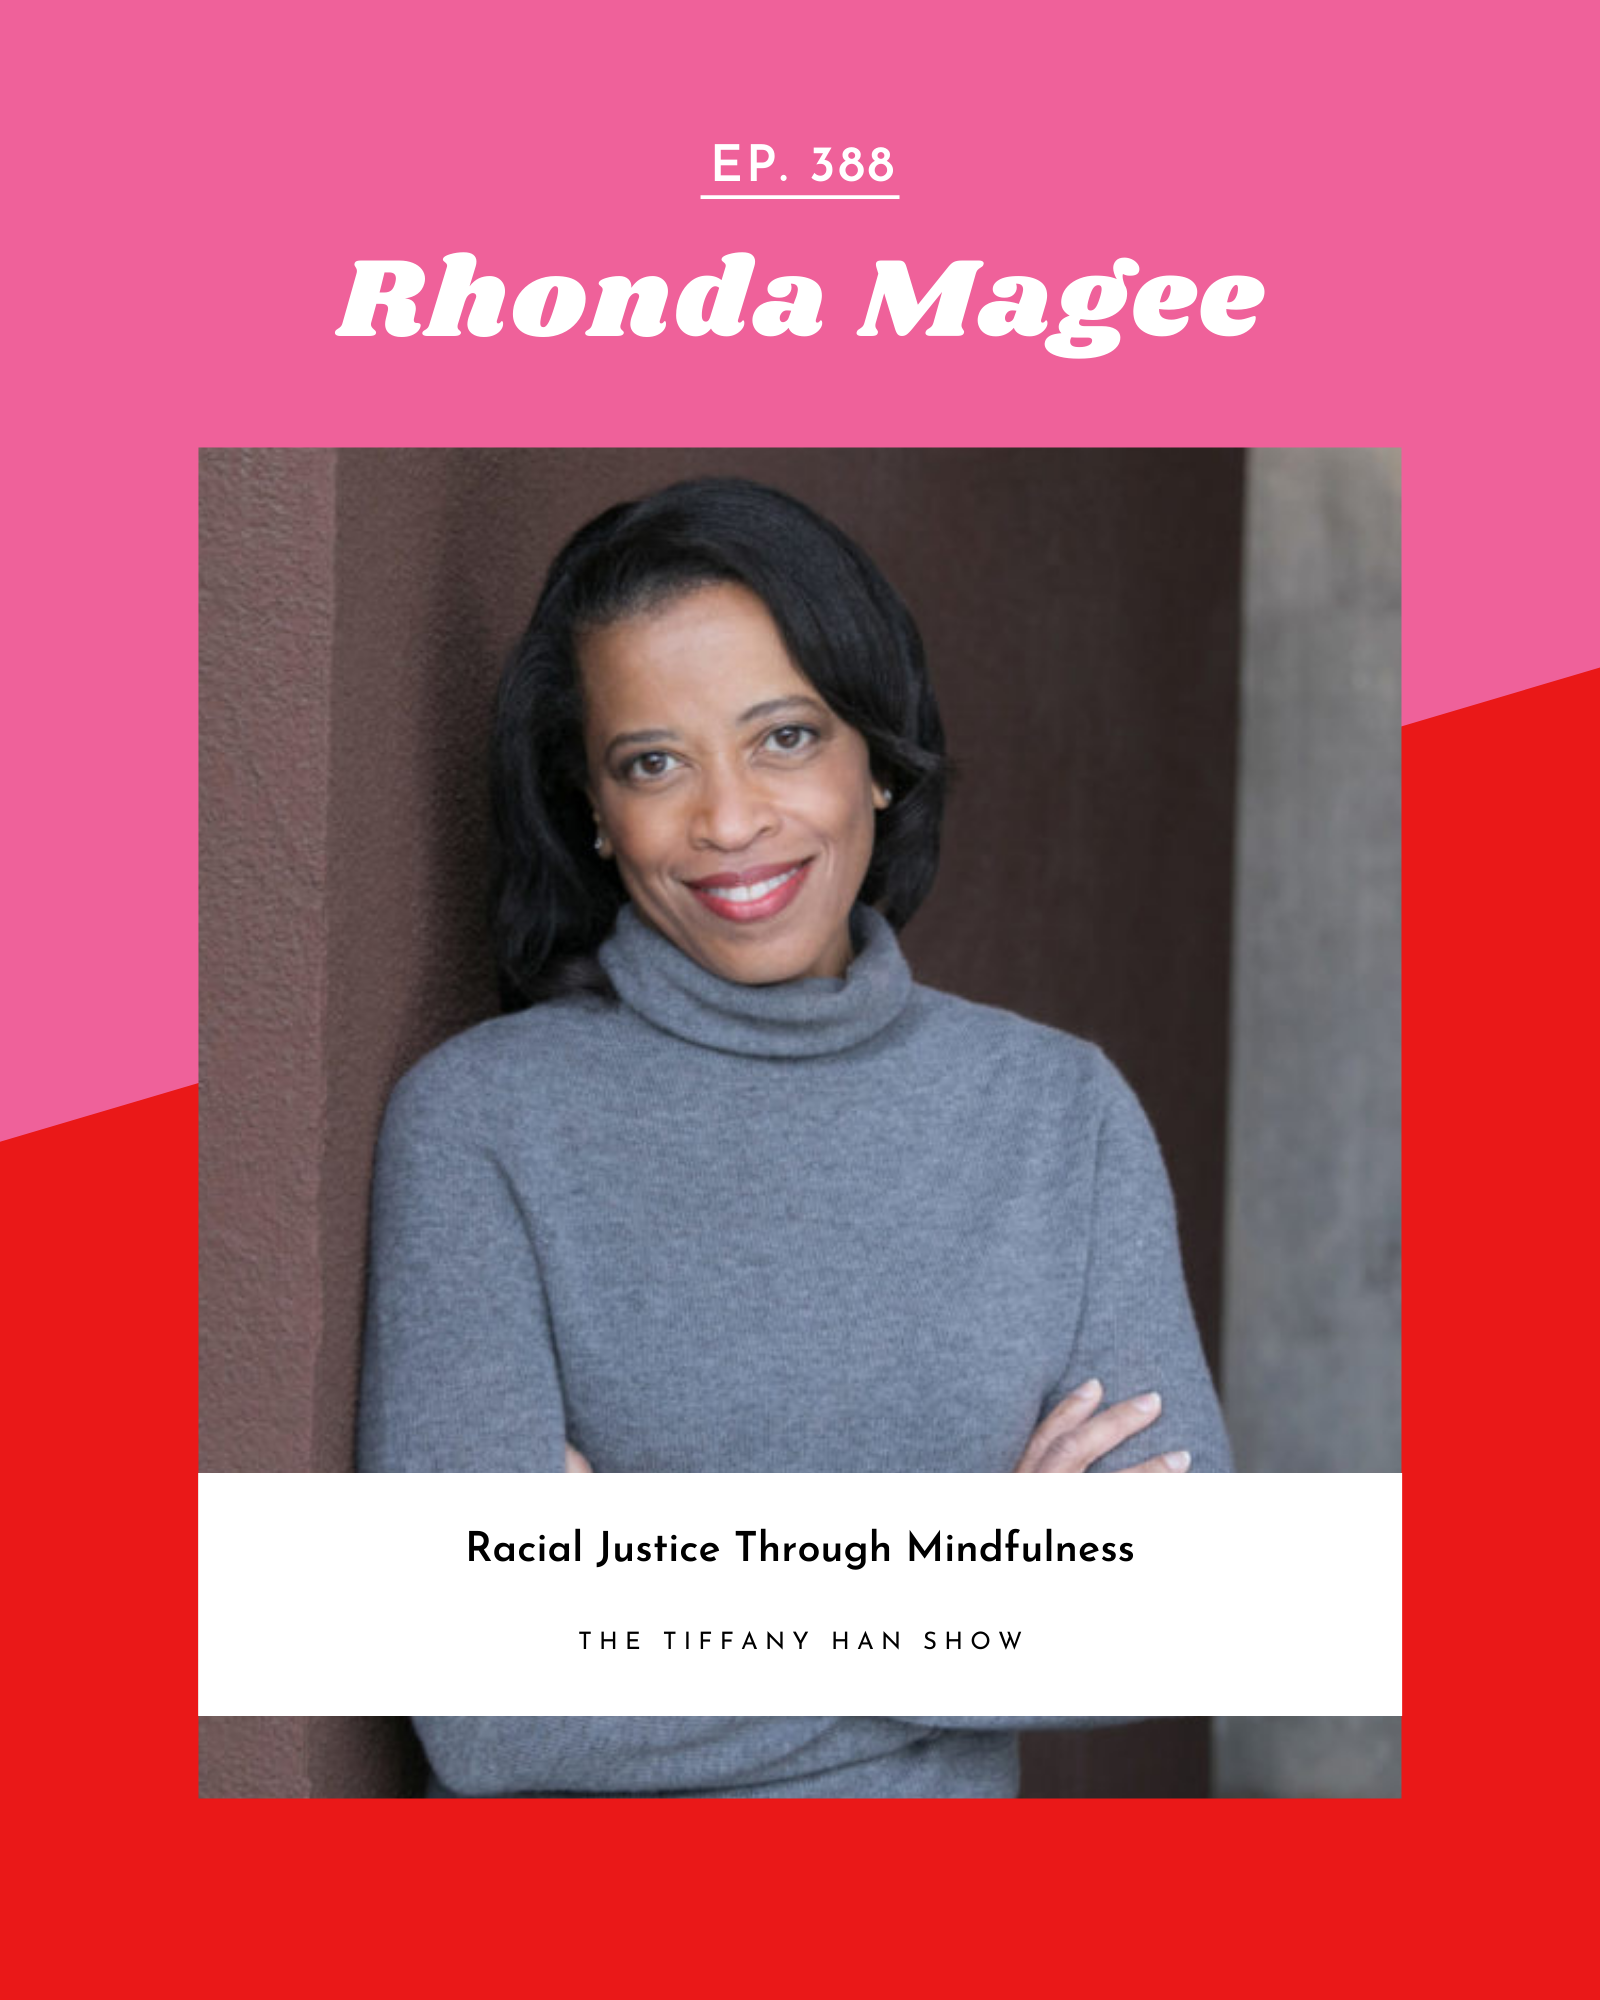 Racial Justice Through Mindfulness with Rhonda Magee 